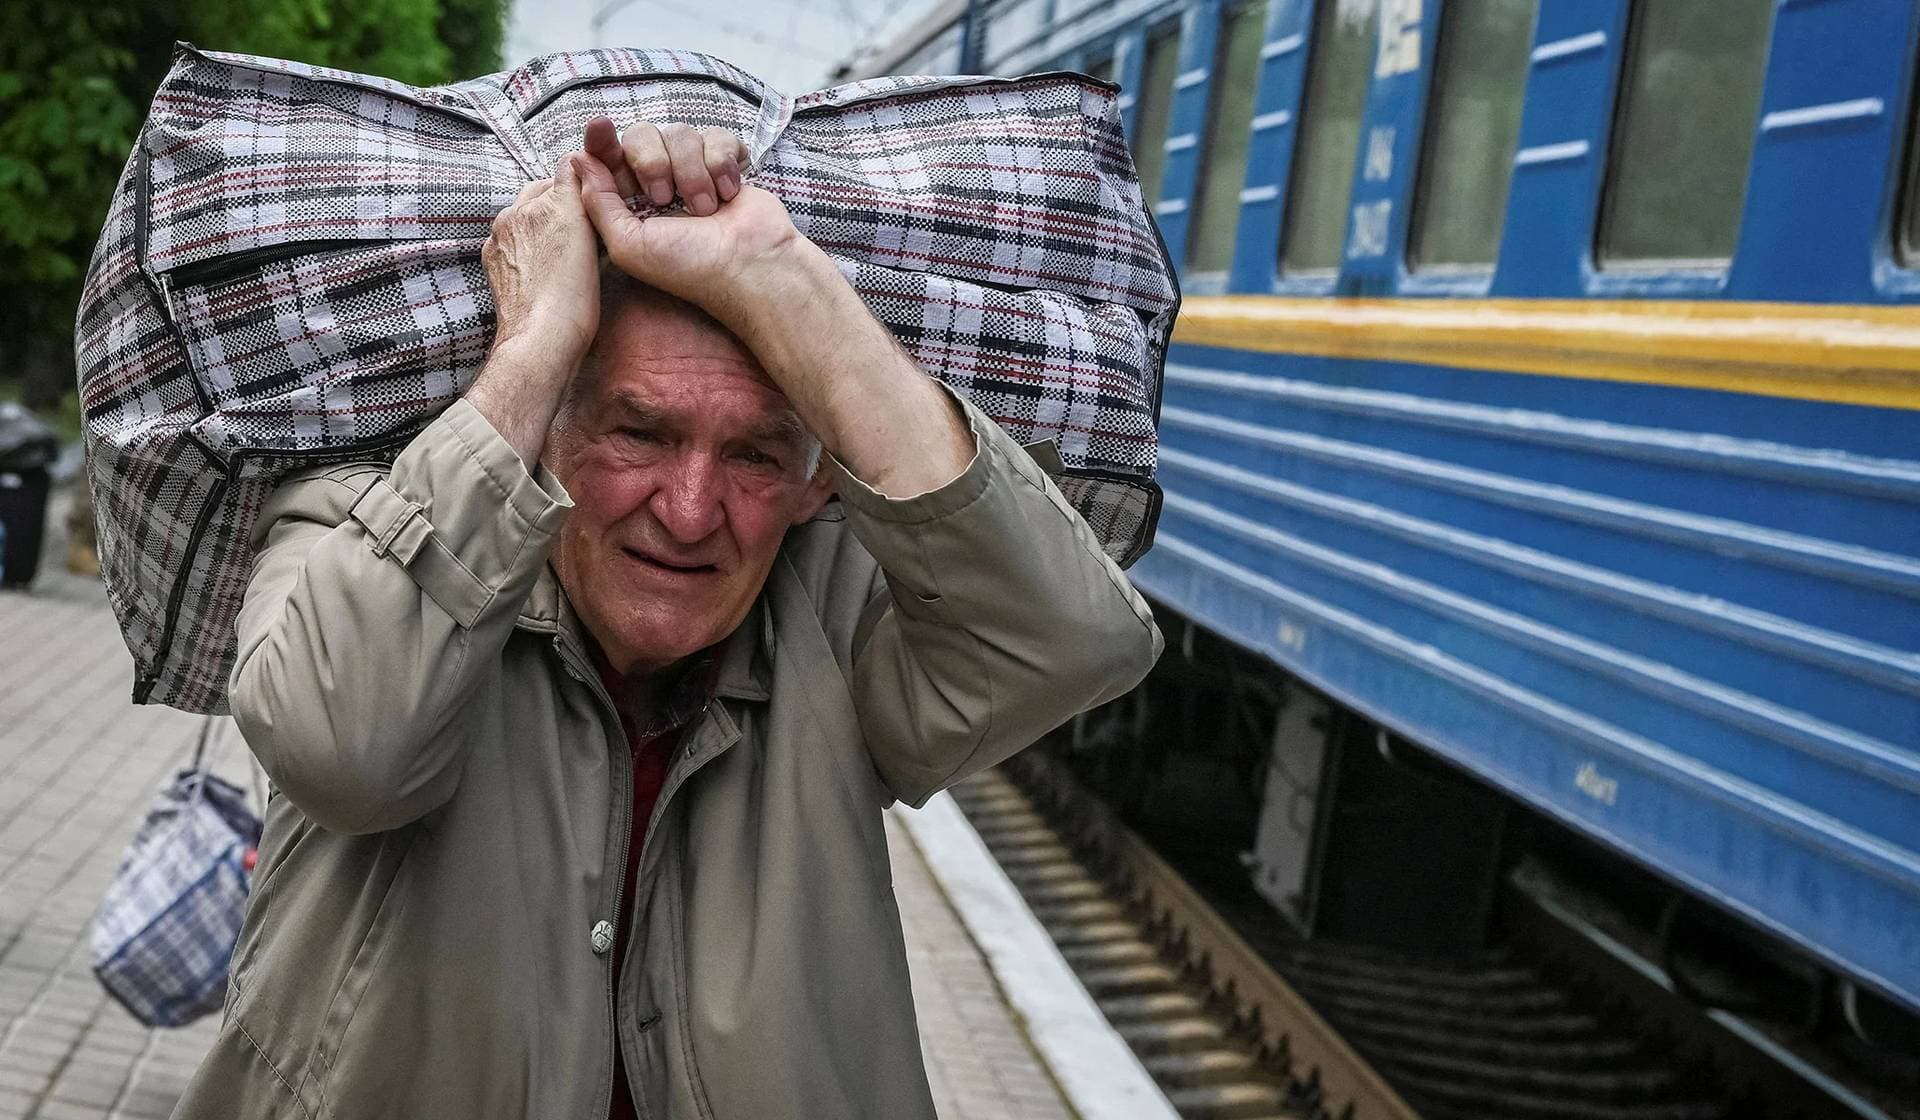 A man boards a train to Lviv during an evacuation effort from war-affected areas of eastern Ukraine in Pokrovsk